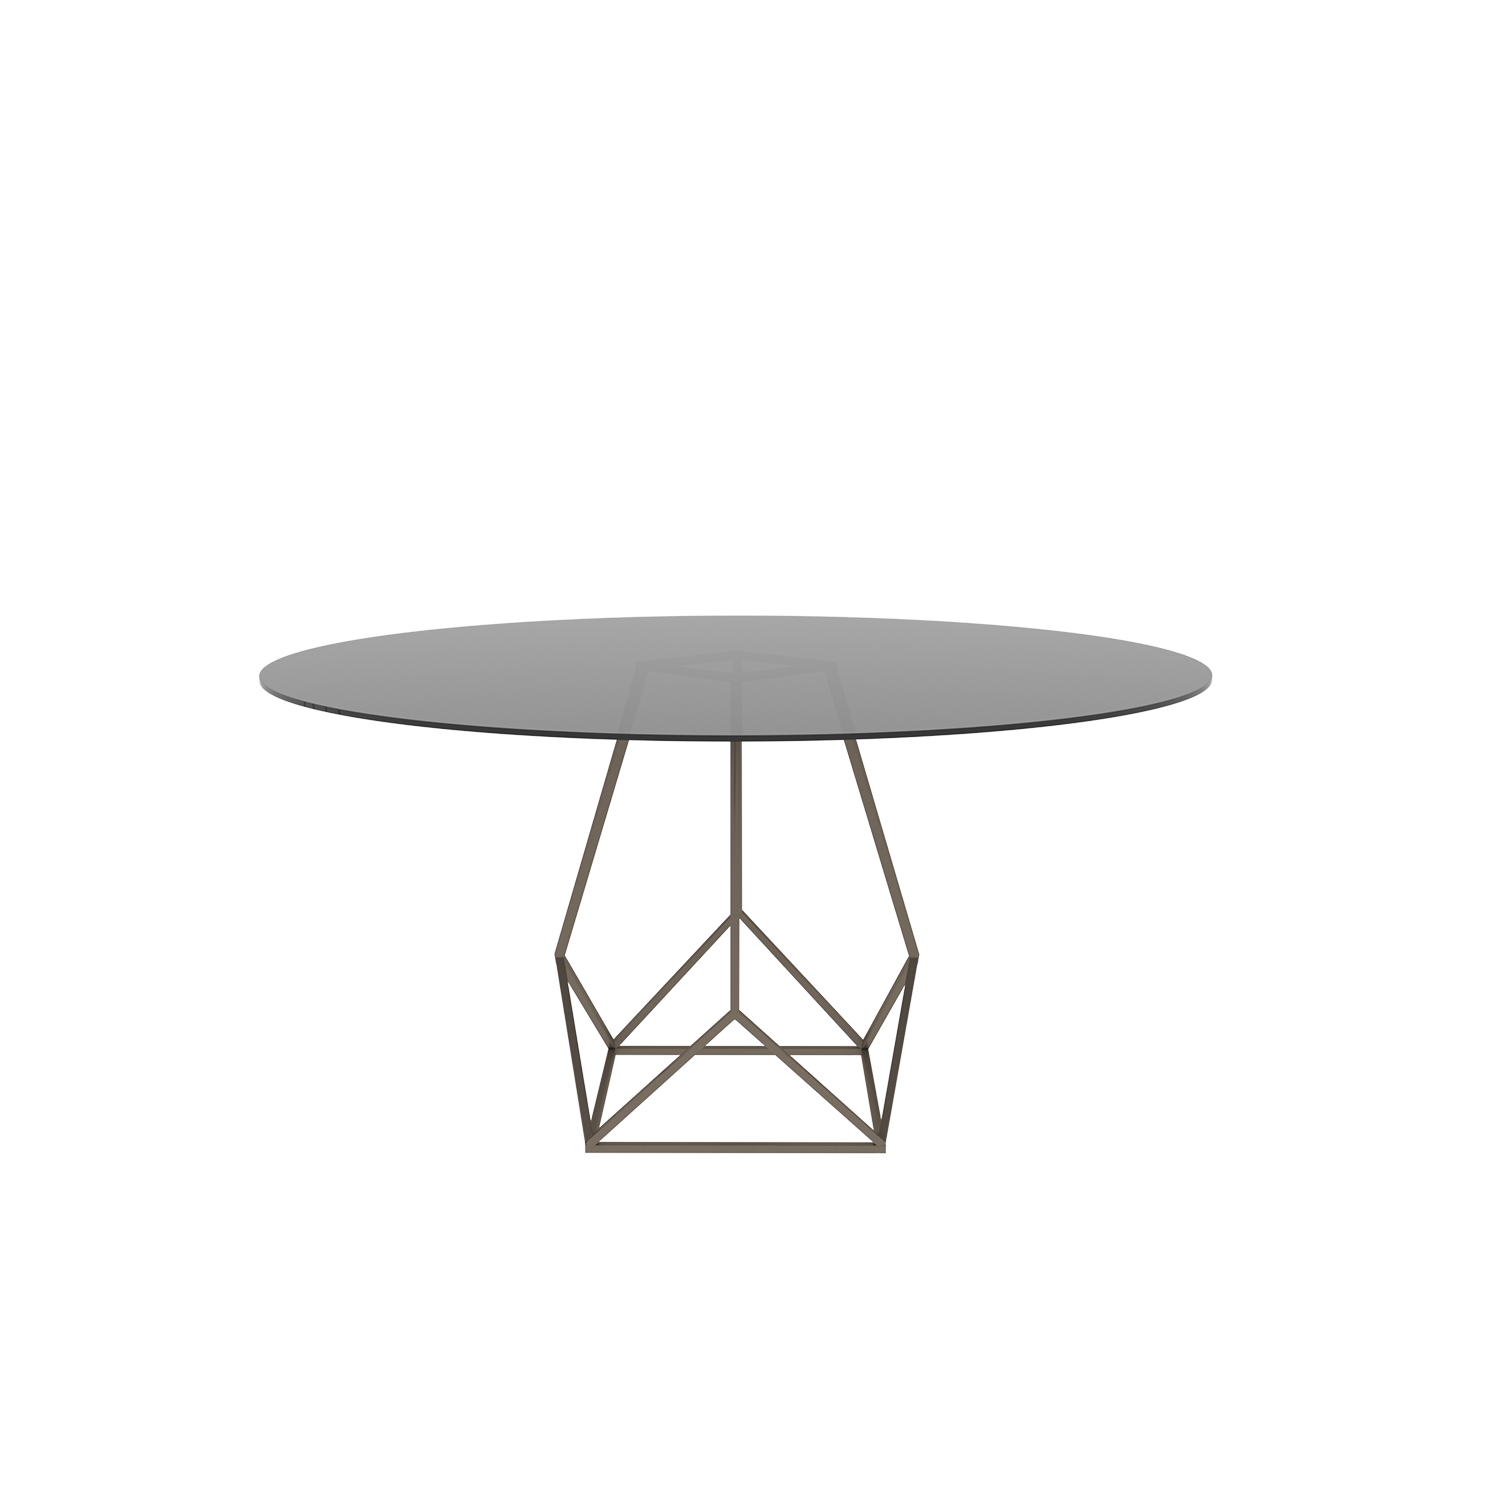 Annette Round Dining Table | Coleccion Alexandra | dining tables | annette-round-dining-table